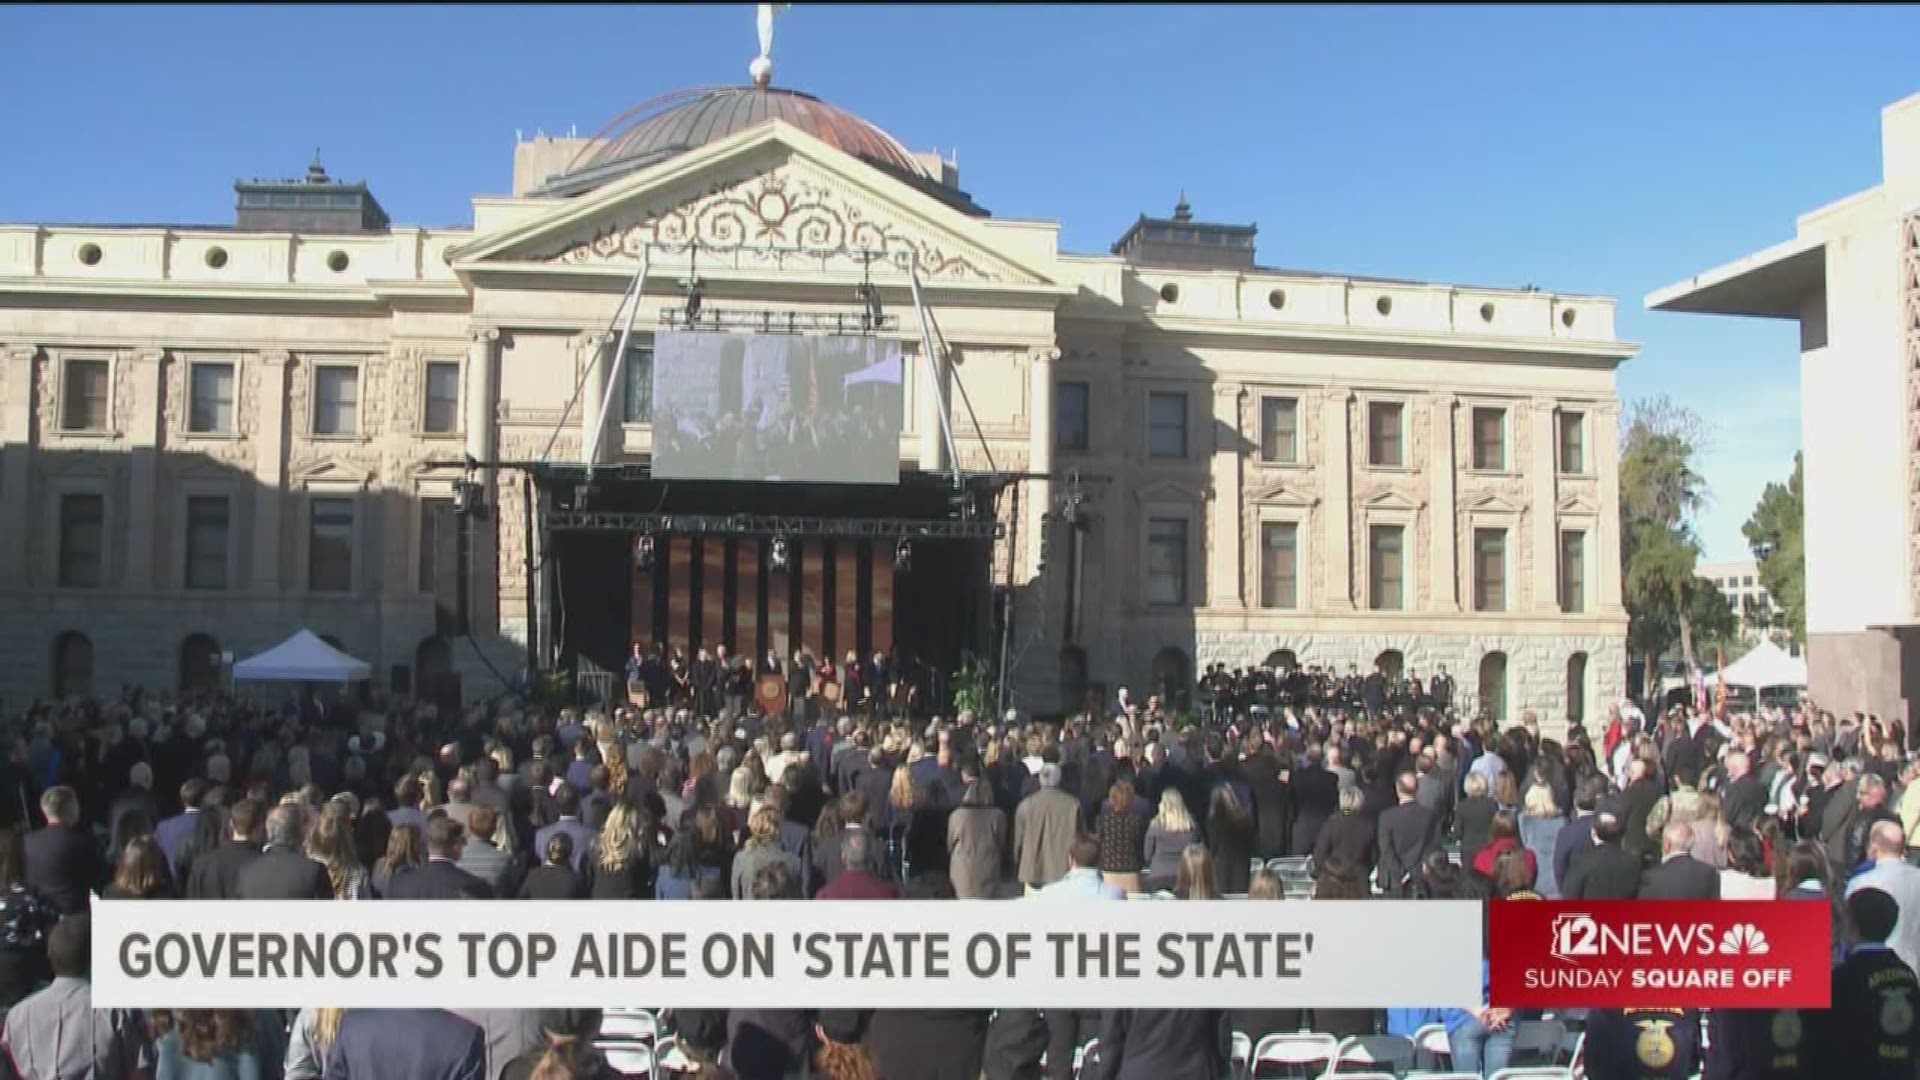 The governor's chief of staff, Daniel Scarpinato, says the 'State of the State' speech will focus on public education, public safety, infrastructure, and rural AZ.